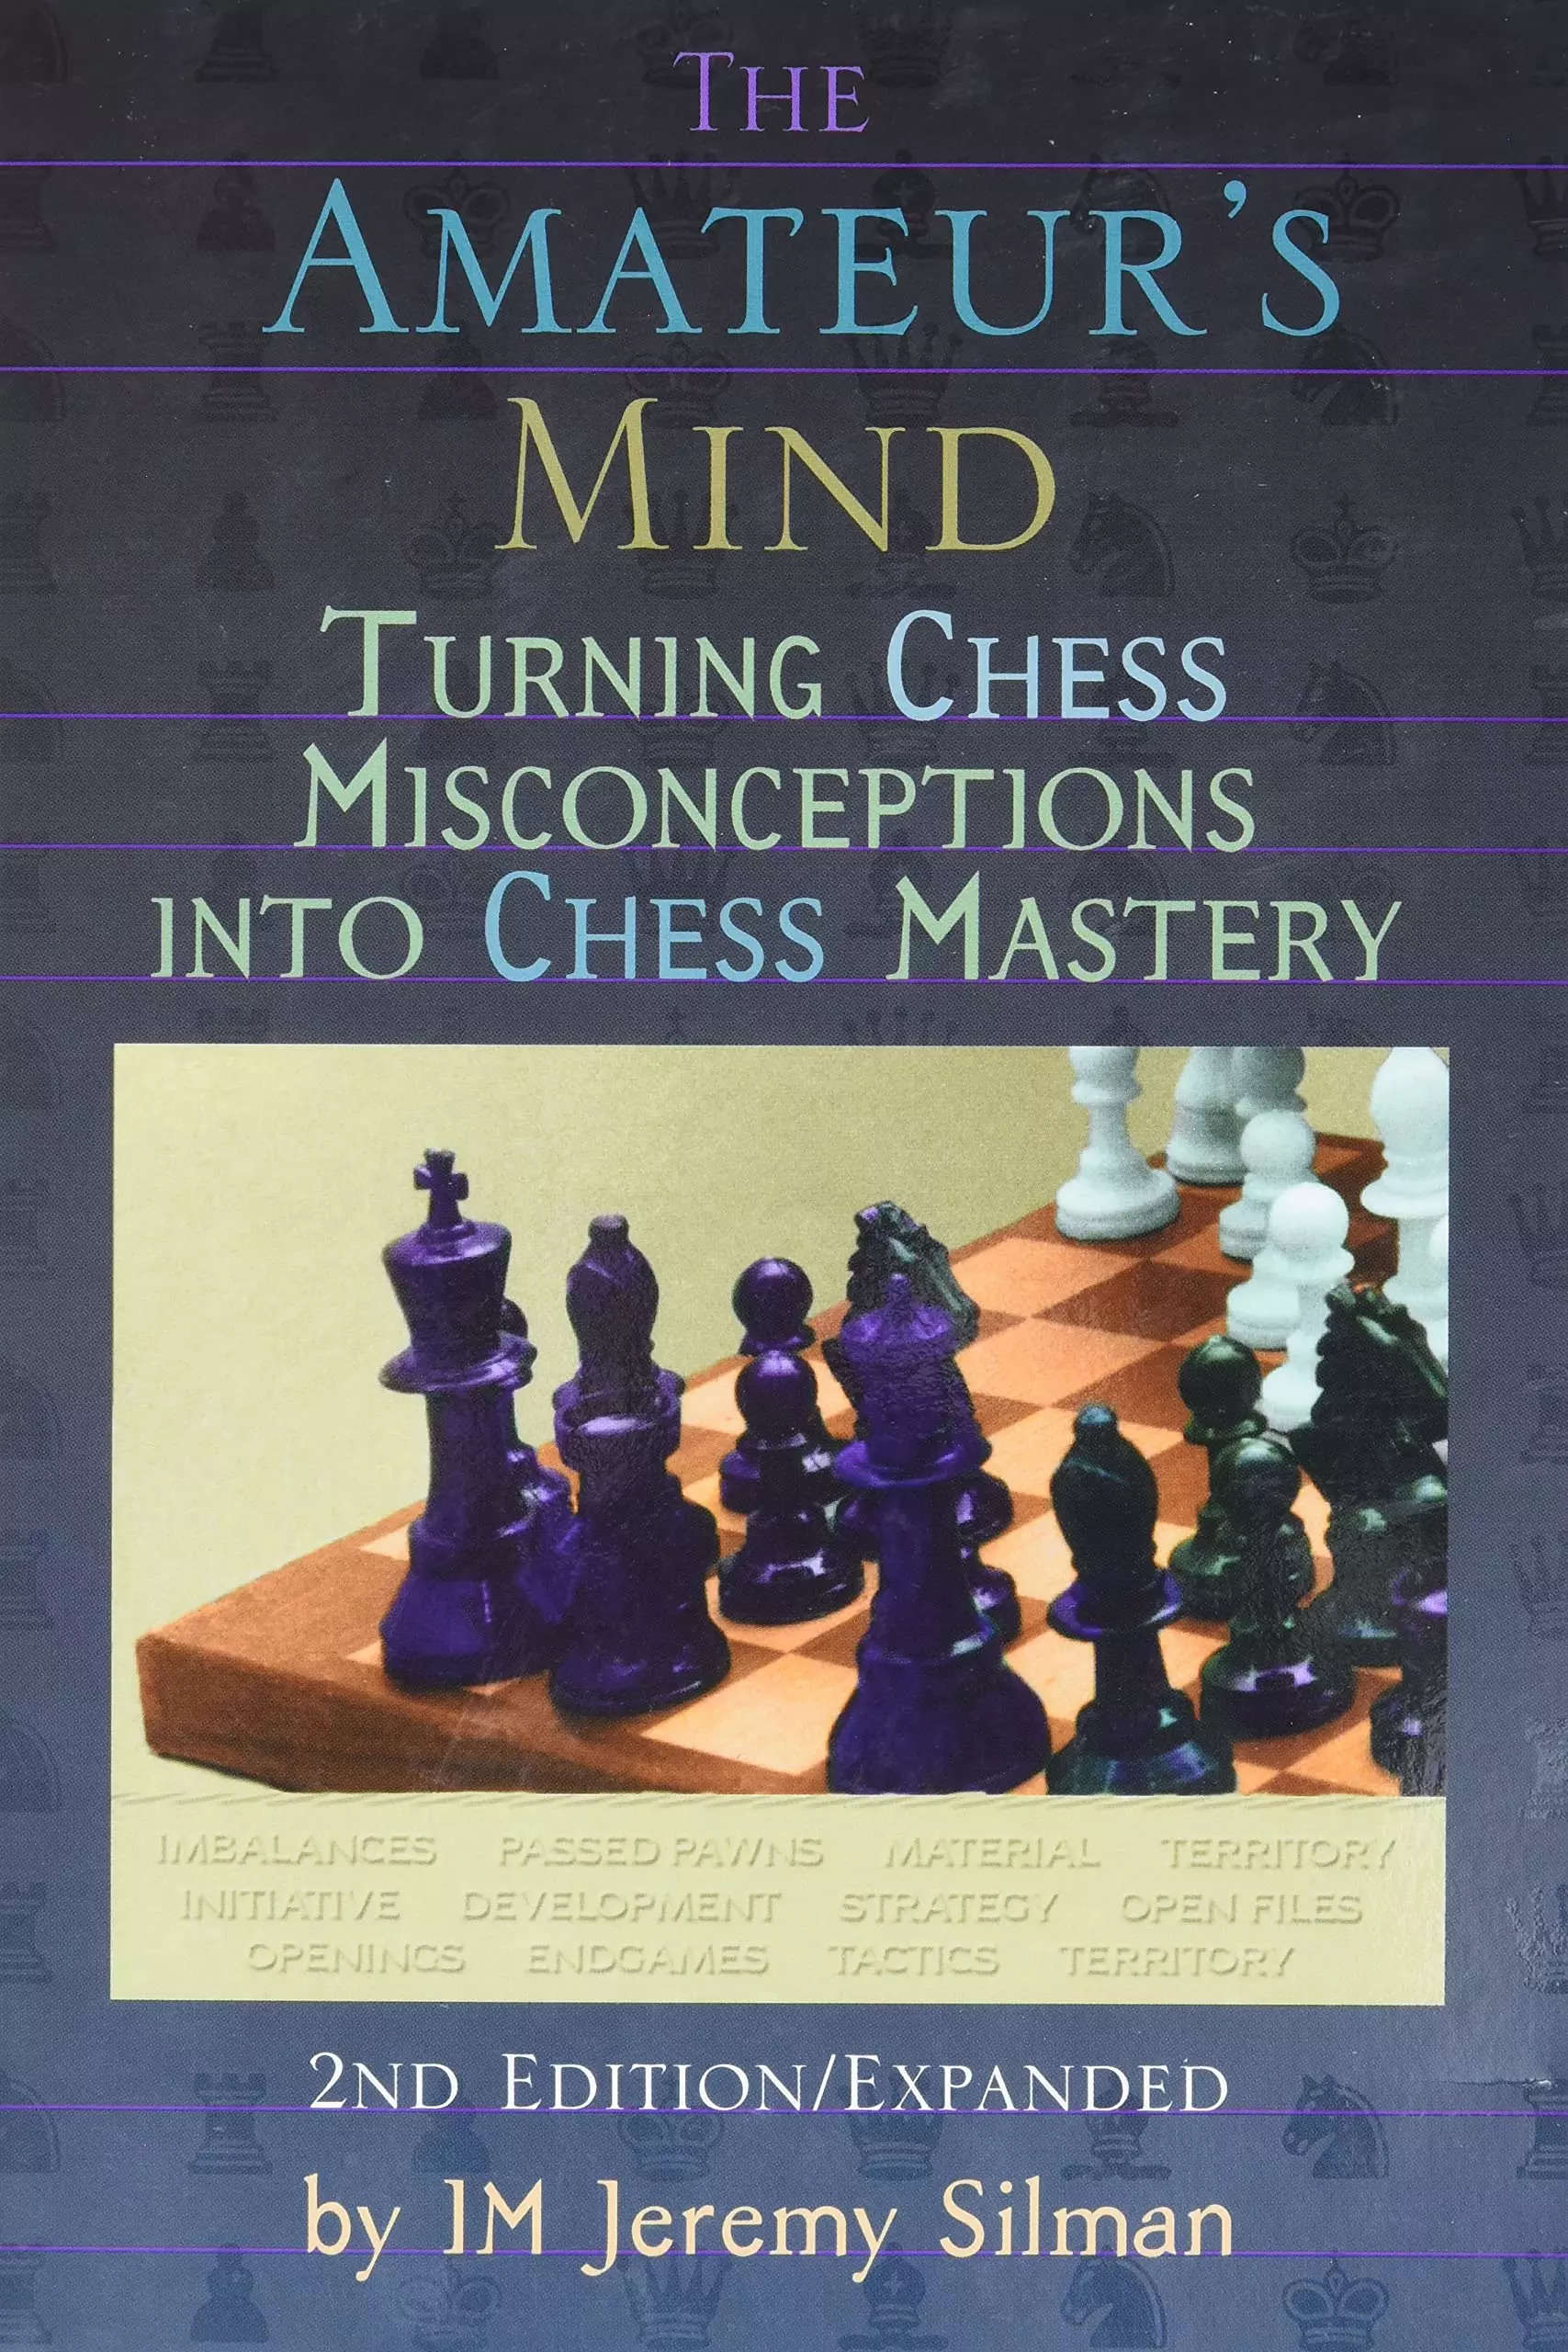 How do authors of chess books create those miniature chess boards and  insert them in pages as a visual aid? - Quora